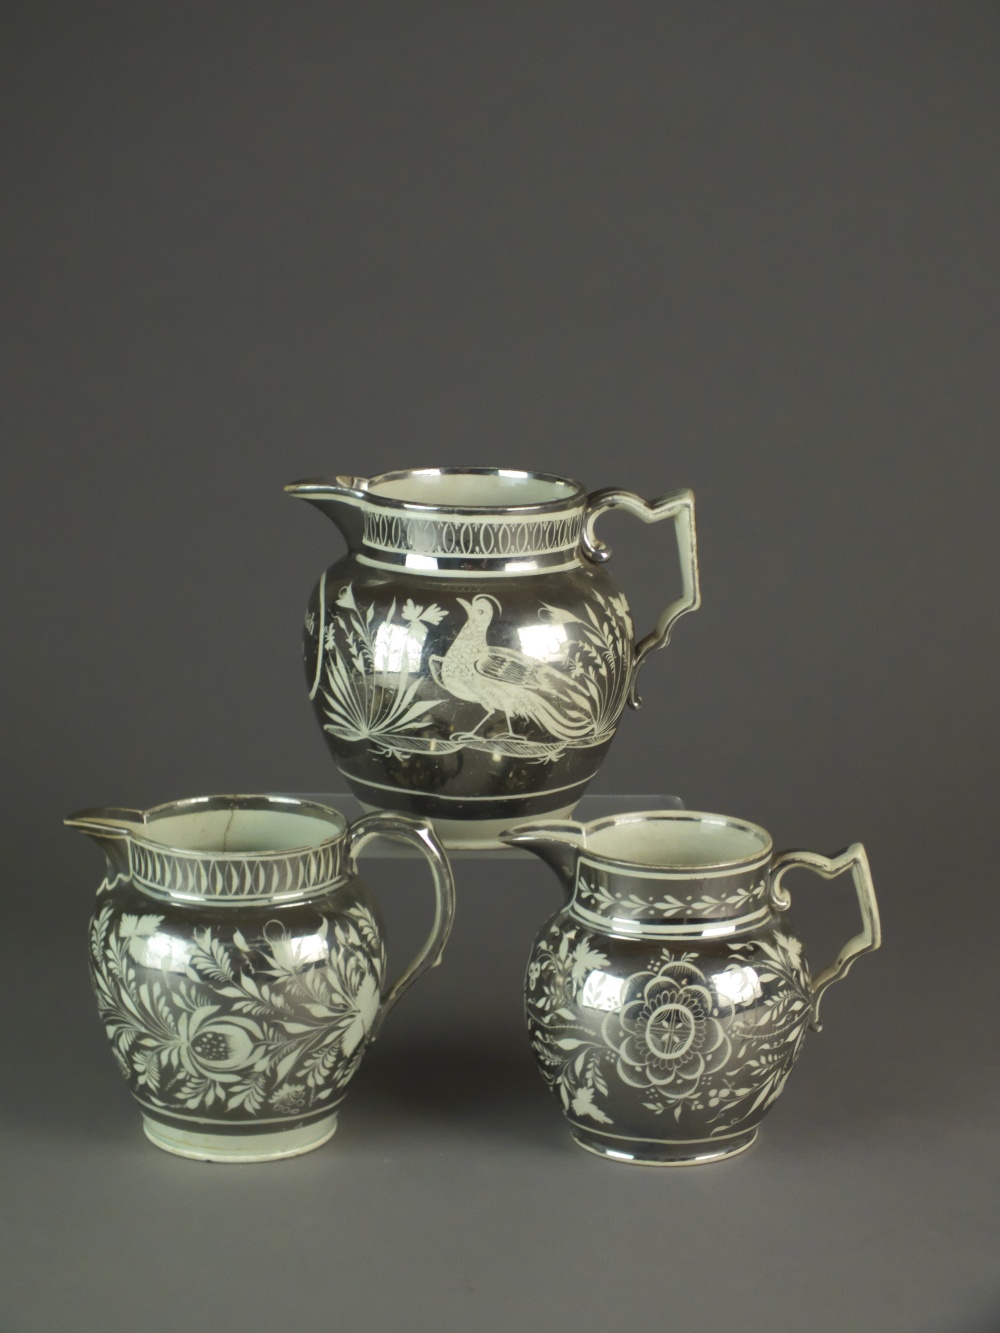 Three English pearlware silver lustre jugs, early 19th century, one named and dated 'Hannah Ivens,